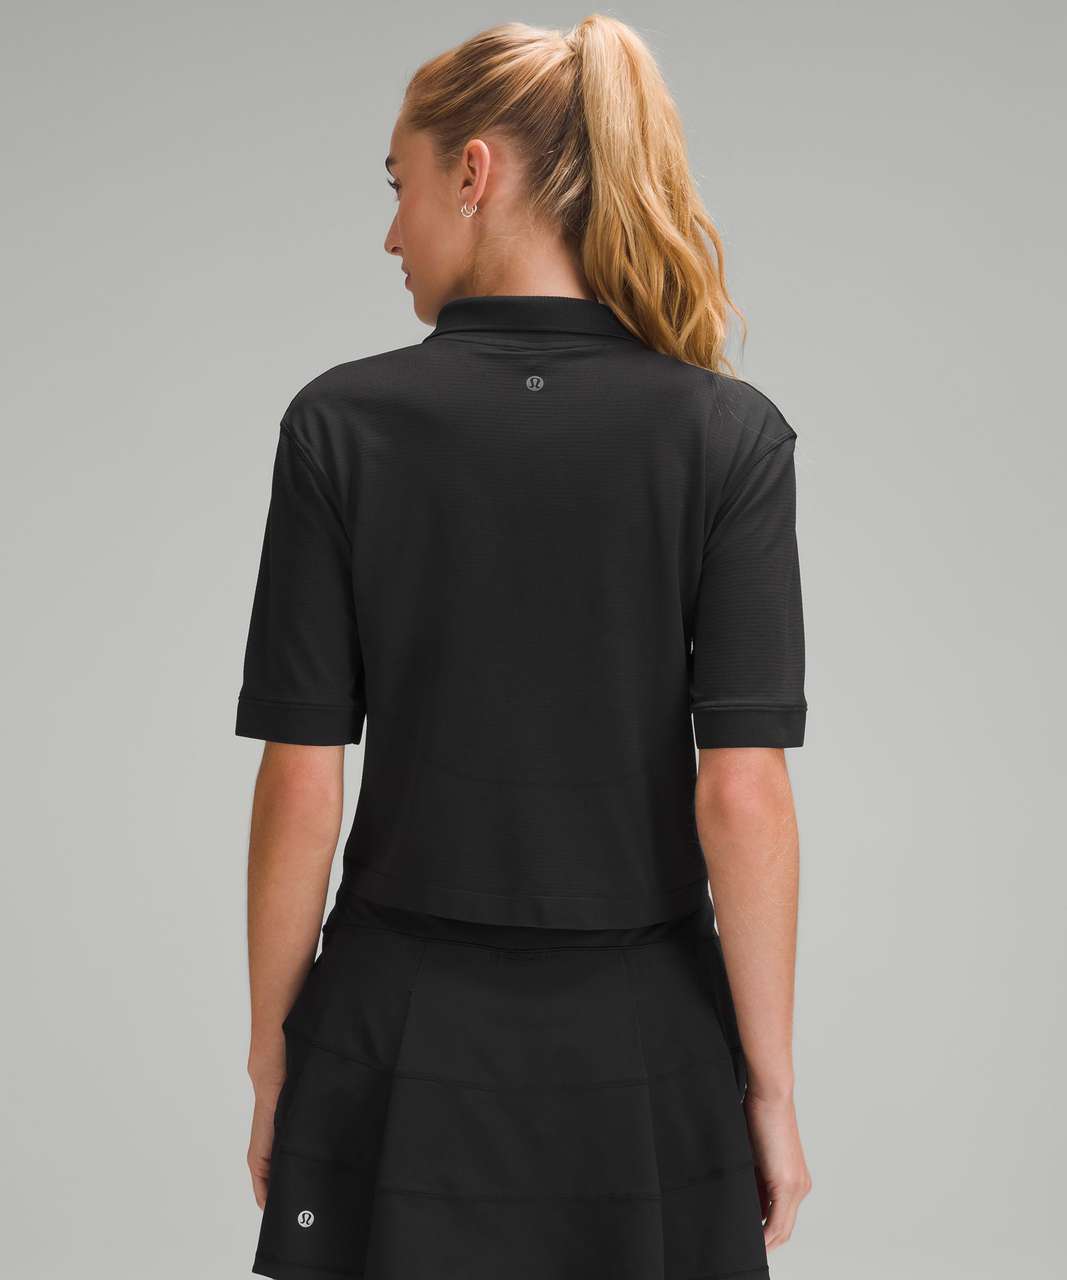 Lululemon Swiftly Tech Relaxed-Fit Polo Shirt - Black / Black